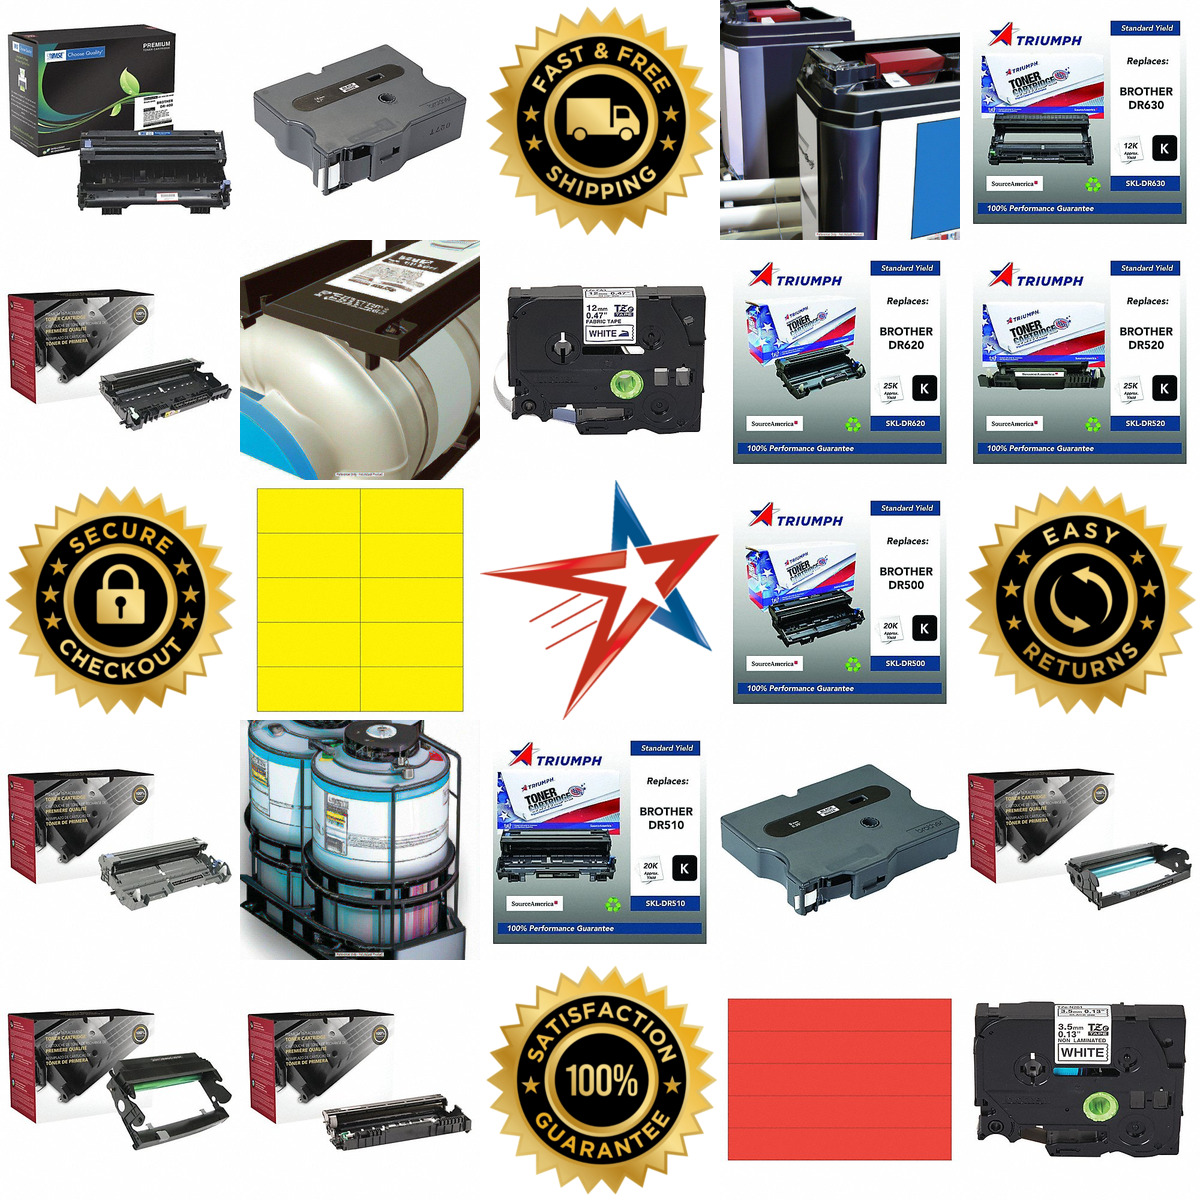 A selection of Printer Drums products on GoVets